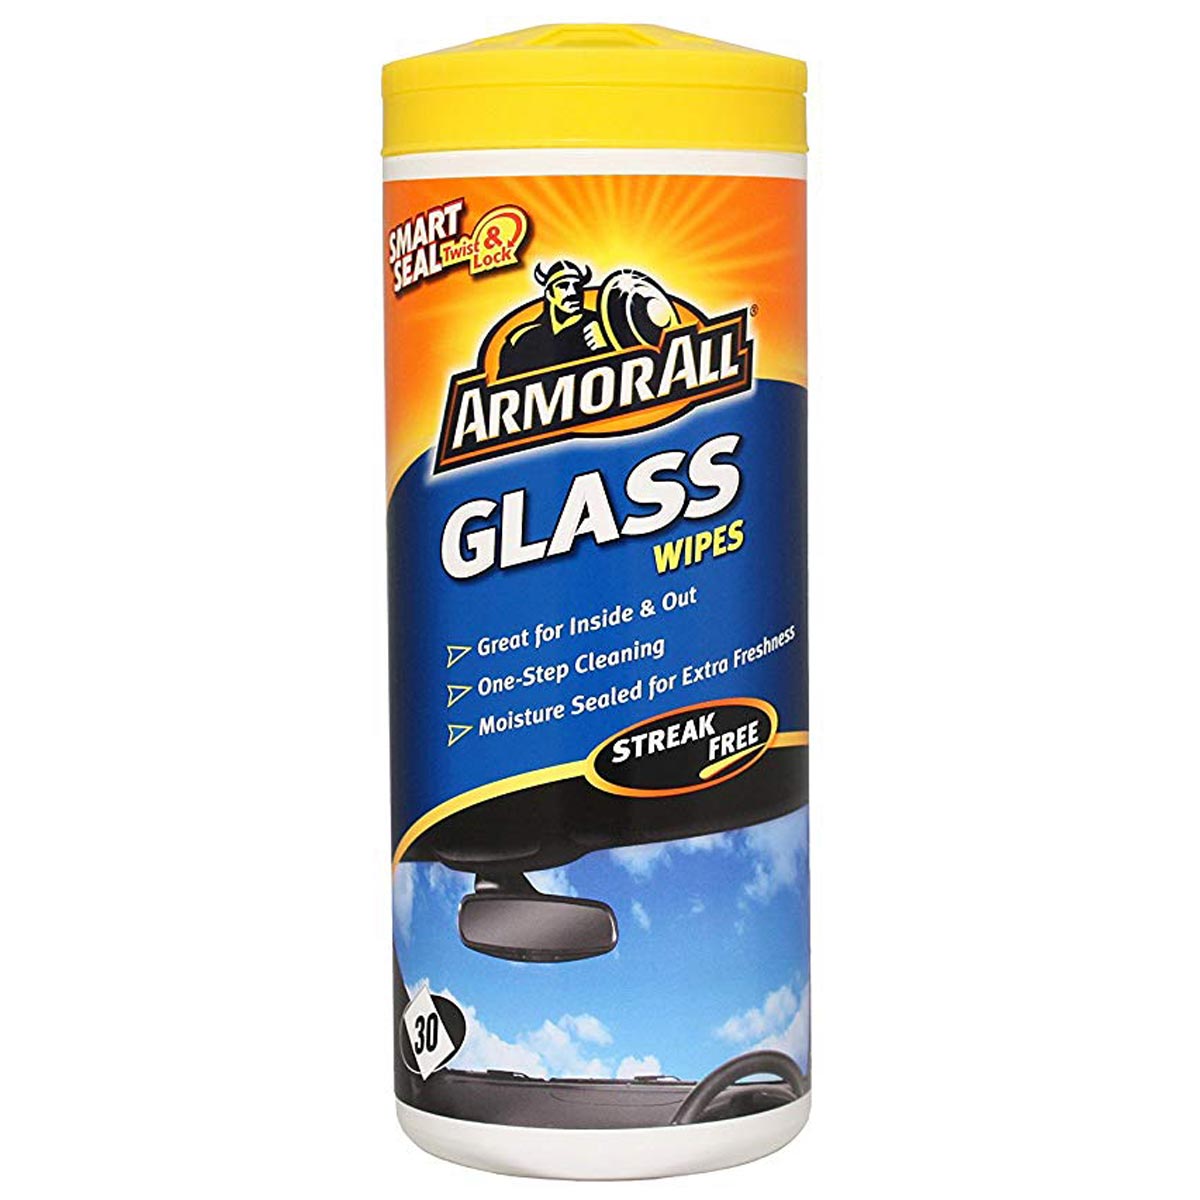 Armor All Glass Wipes - 30 Wipes Pack